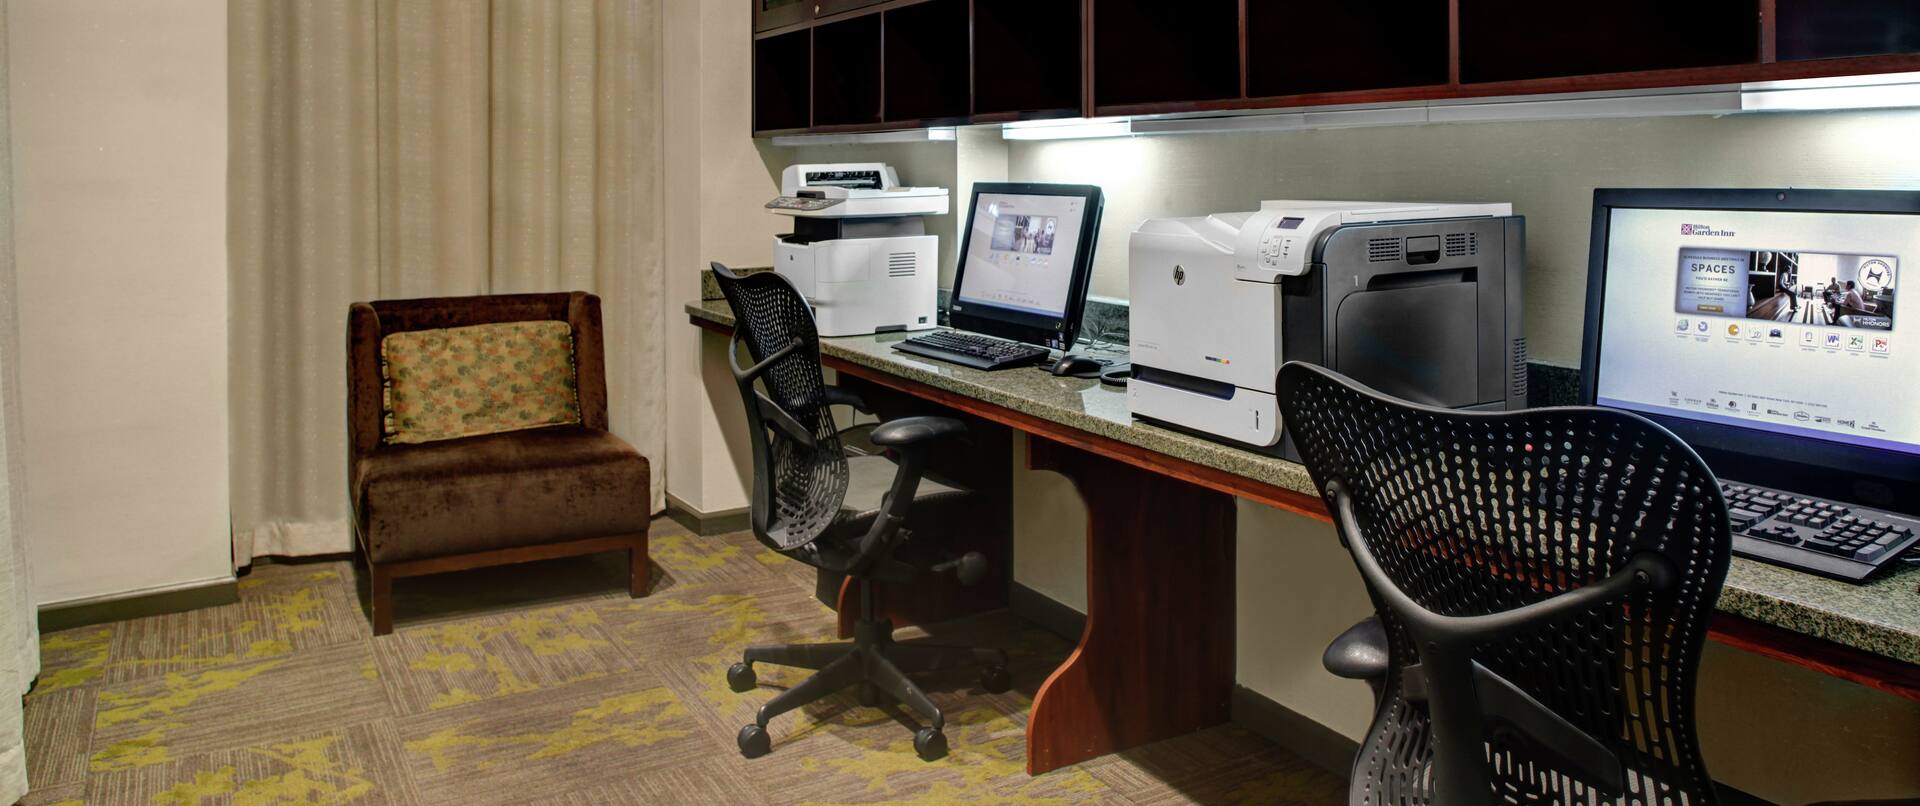 Business Center With Lounge Chair, Window With Sheer Drape, Two Computer Workstations, Ergonomic Chairs, Printer, and Fax/Copier